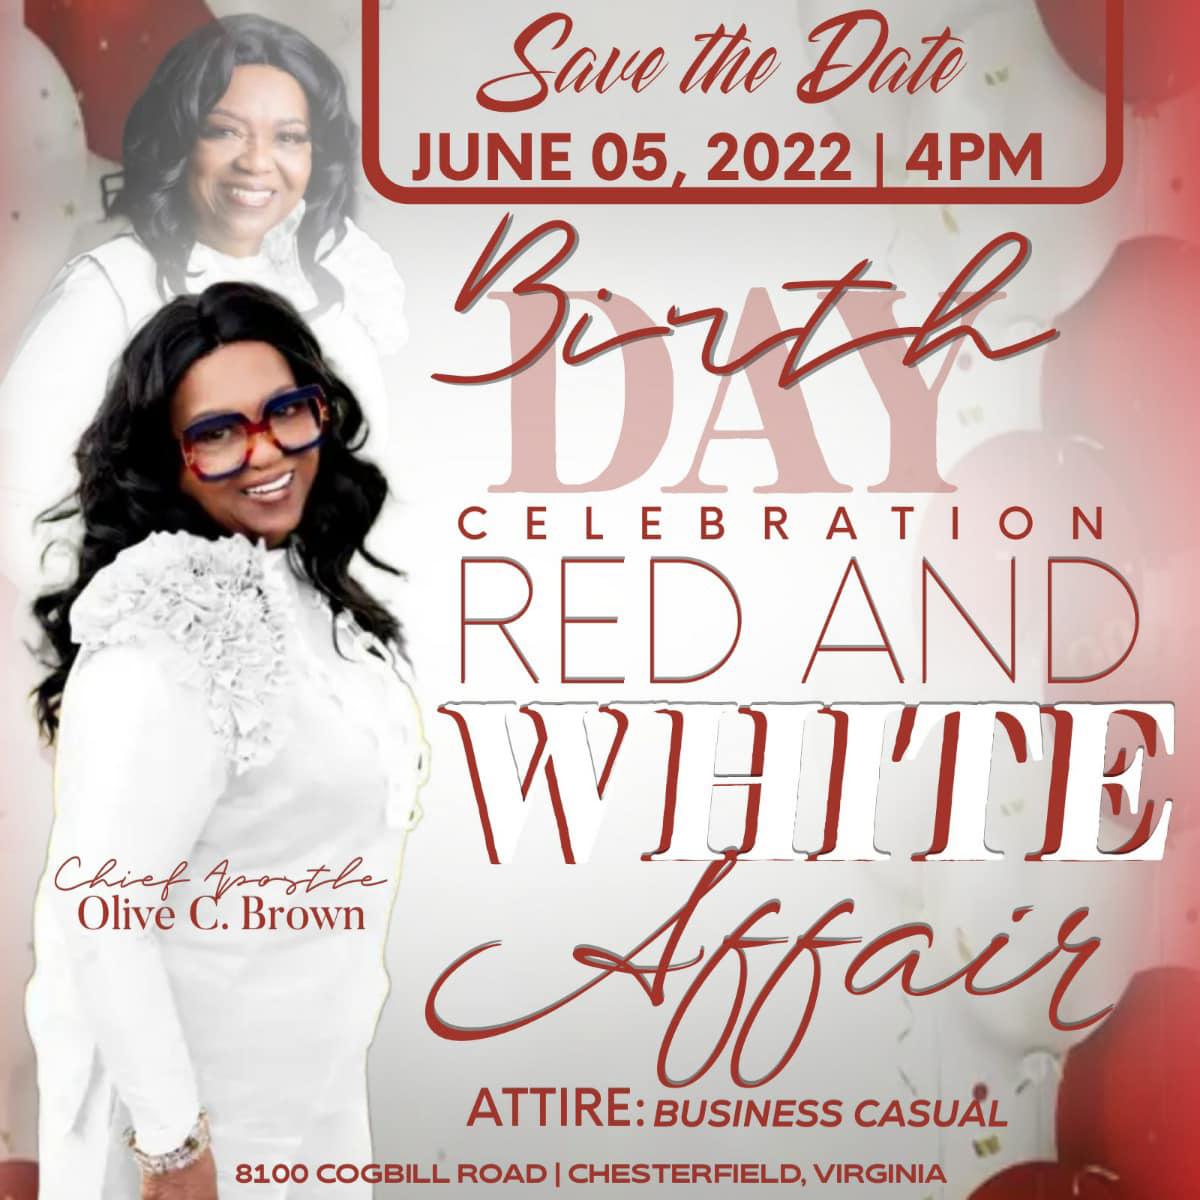 Red and White Affair for Chief Apostle Olive C. Brown